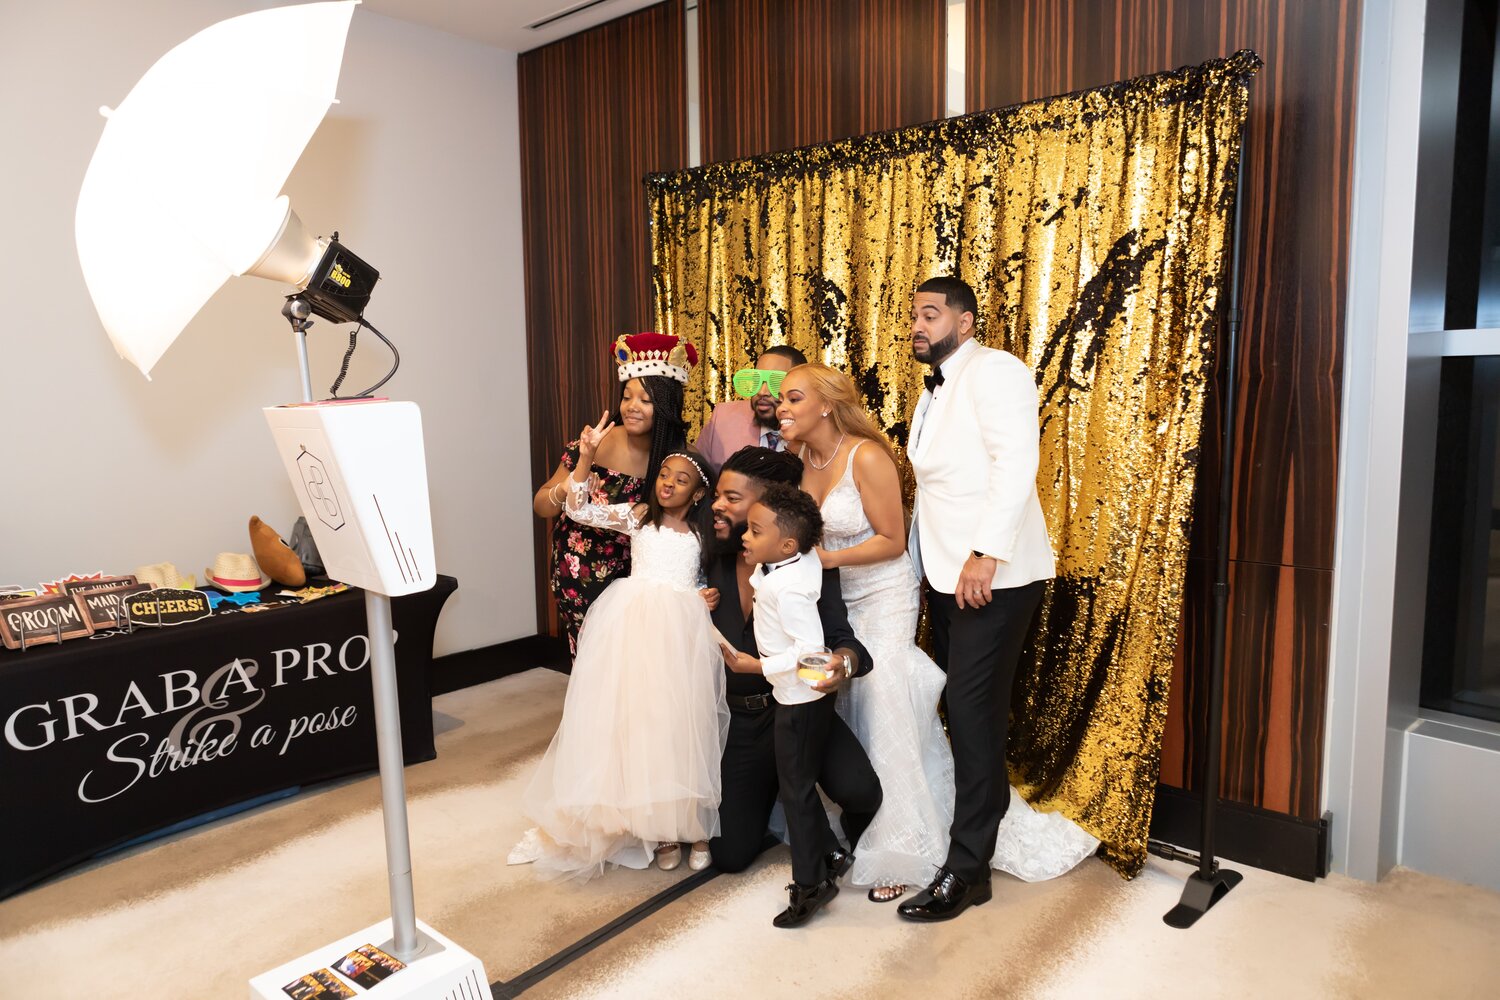 Things to Consider When Buying a Photo Booth in our Photobooth Buying Guide